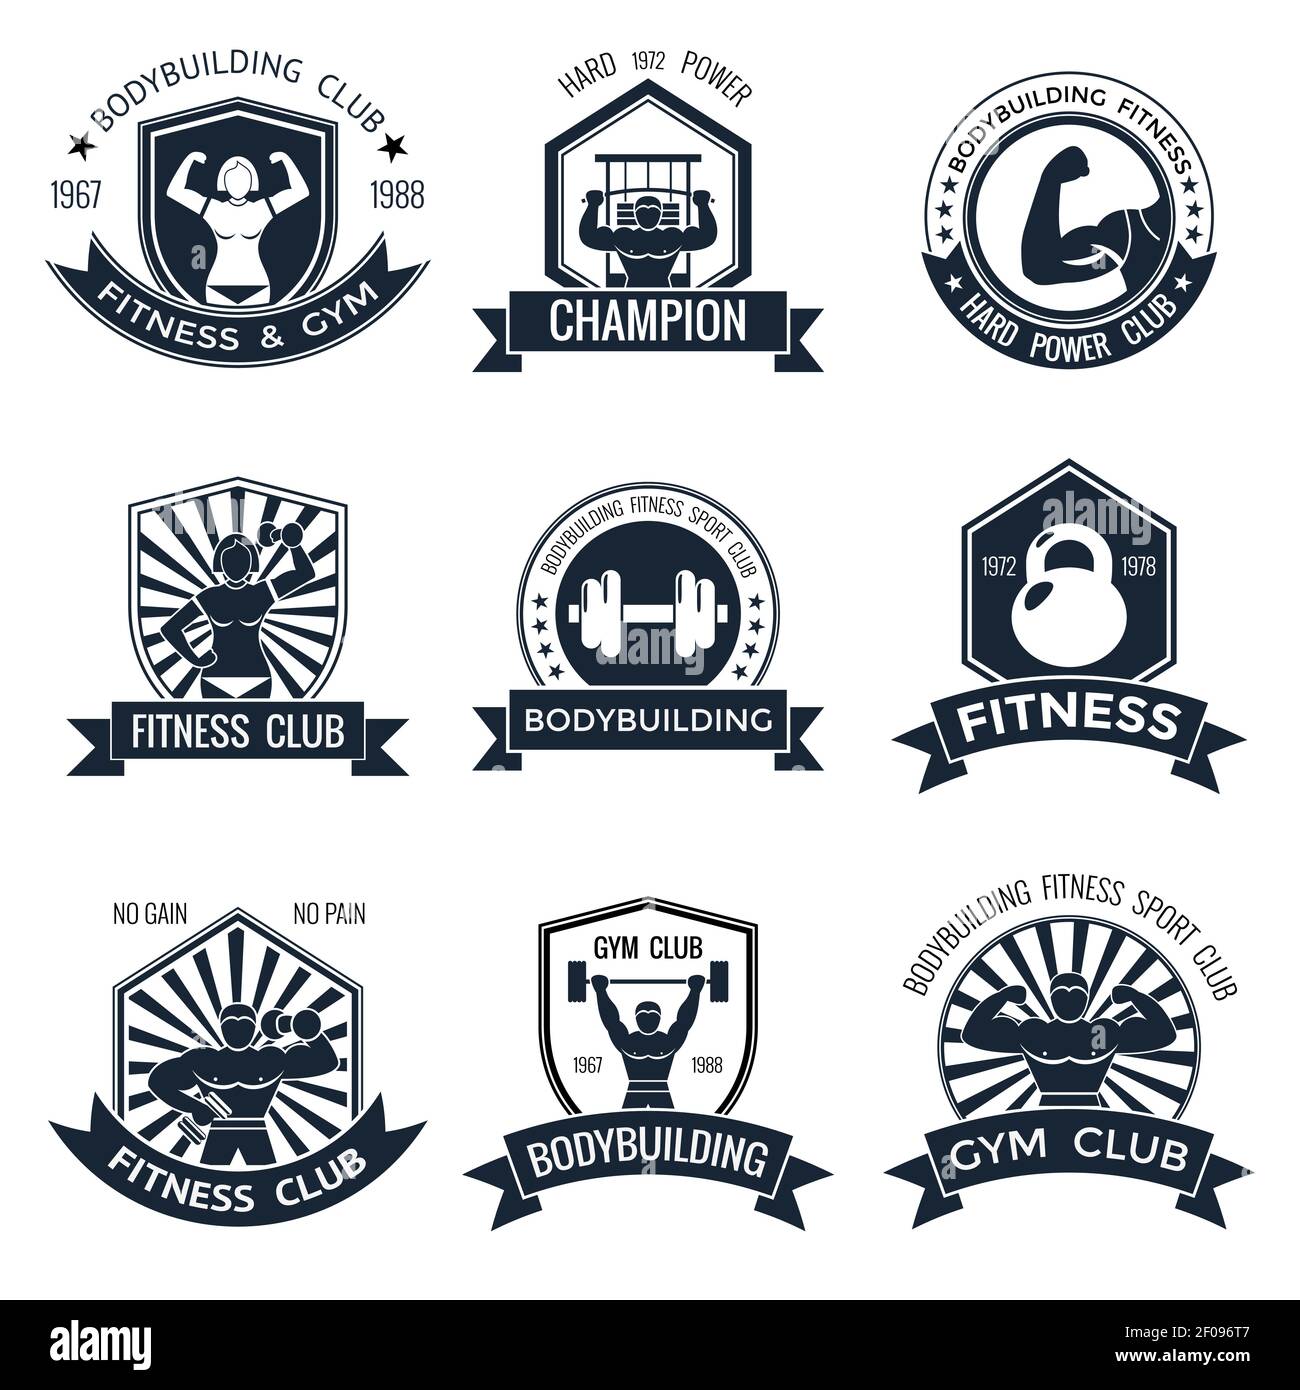 Bodybuilding black and white different shapes labels set with